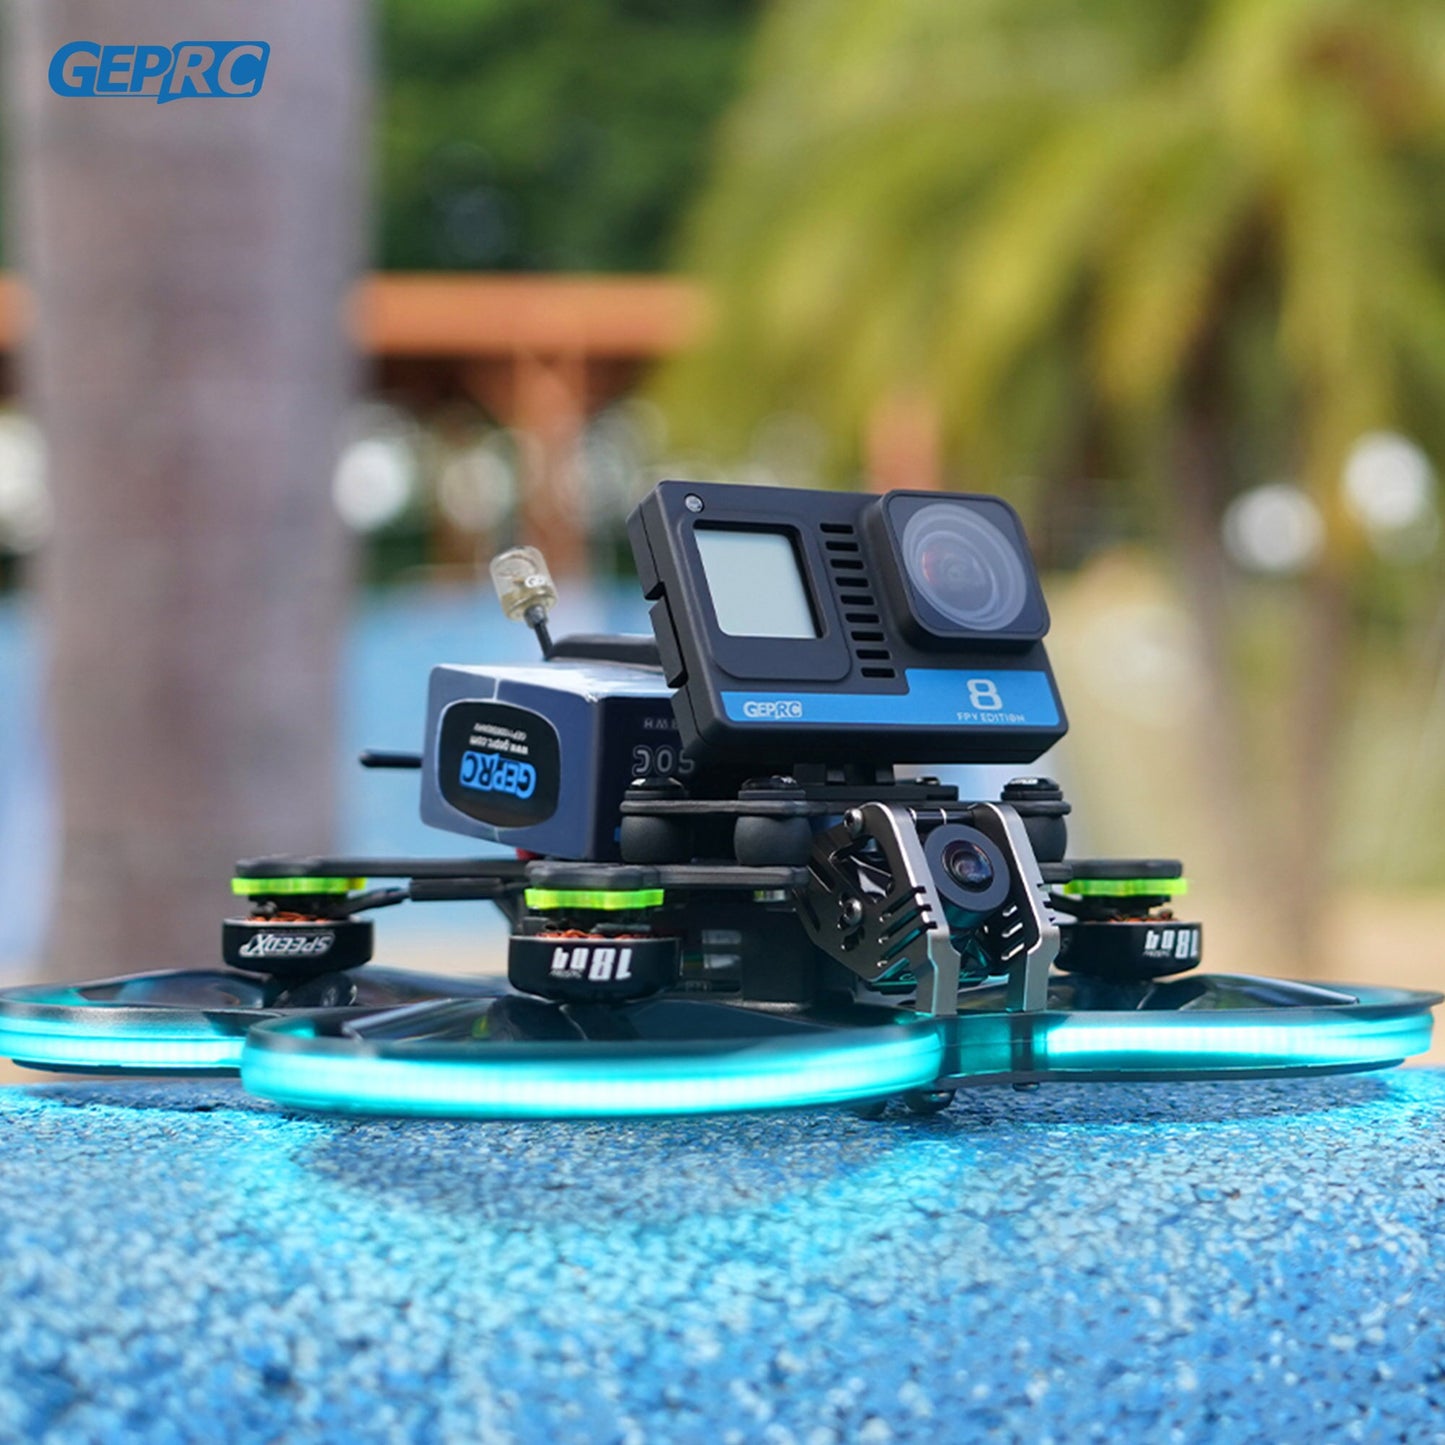 GEPRC Cinebot30 HD - Runcam Link Wasp 4S FPV Drone ELRS 2.4G TBS Nano RX COB Lamp with HD Vista micro System for high tech FPV